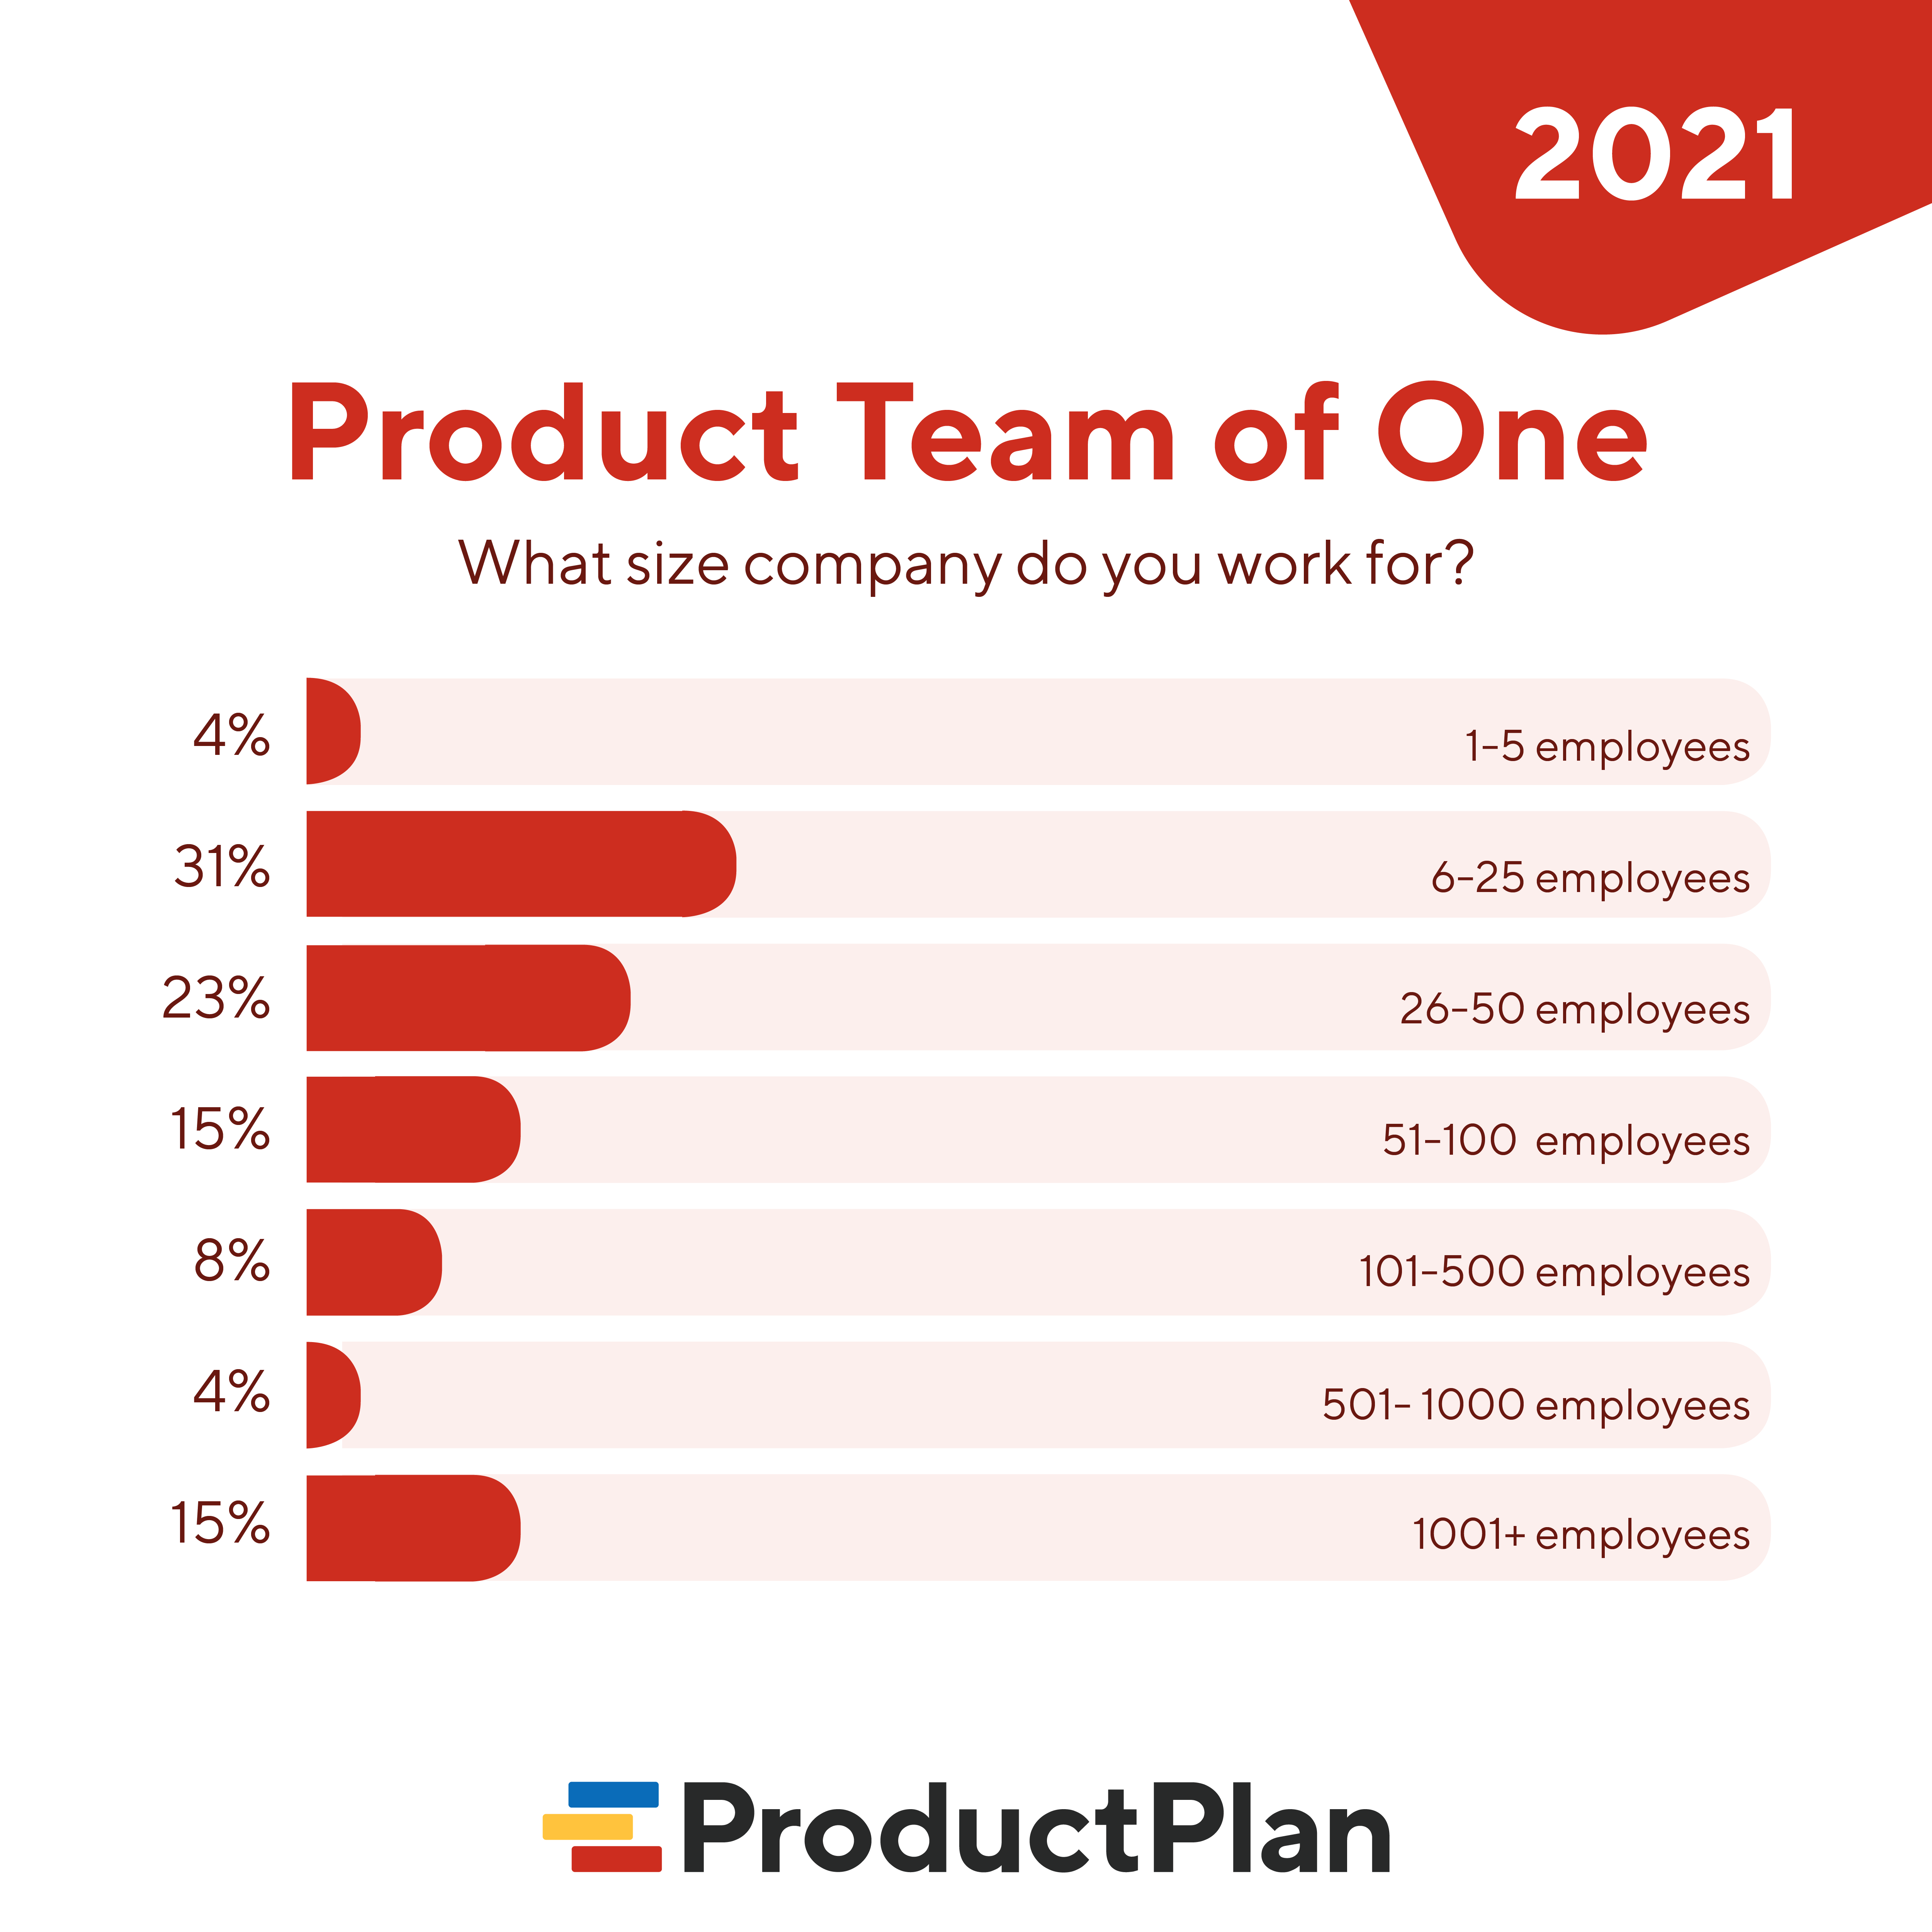 Product Team of One What size company do you work for?